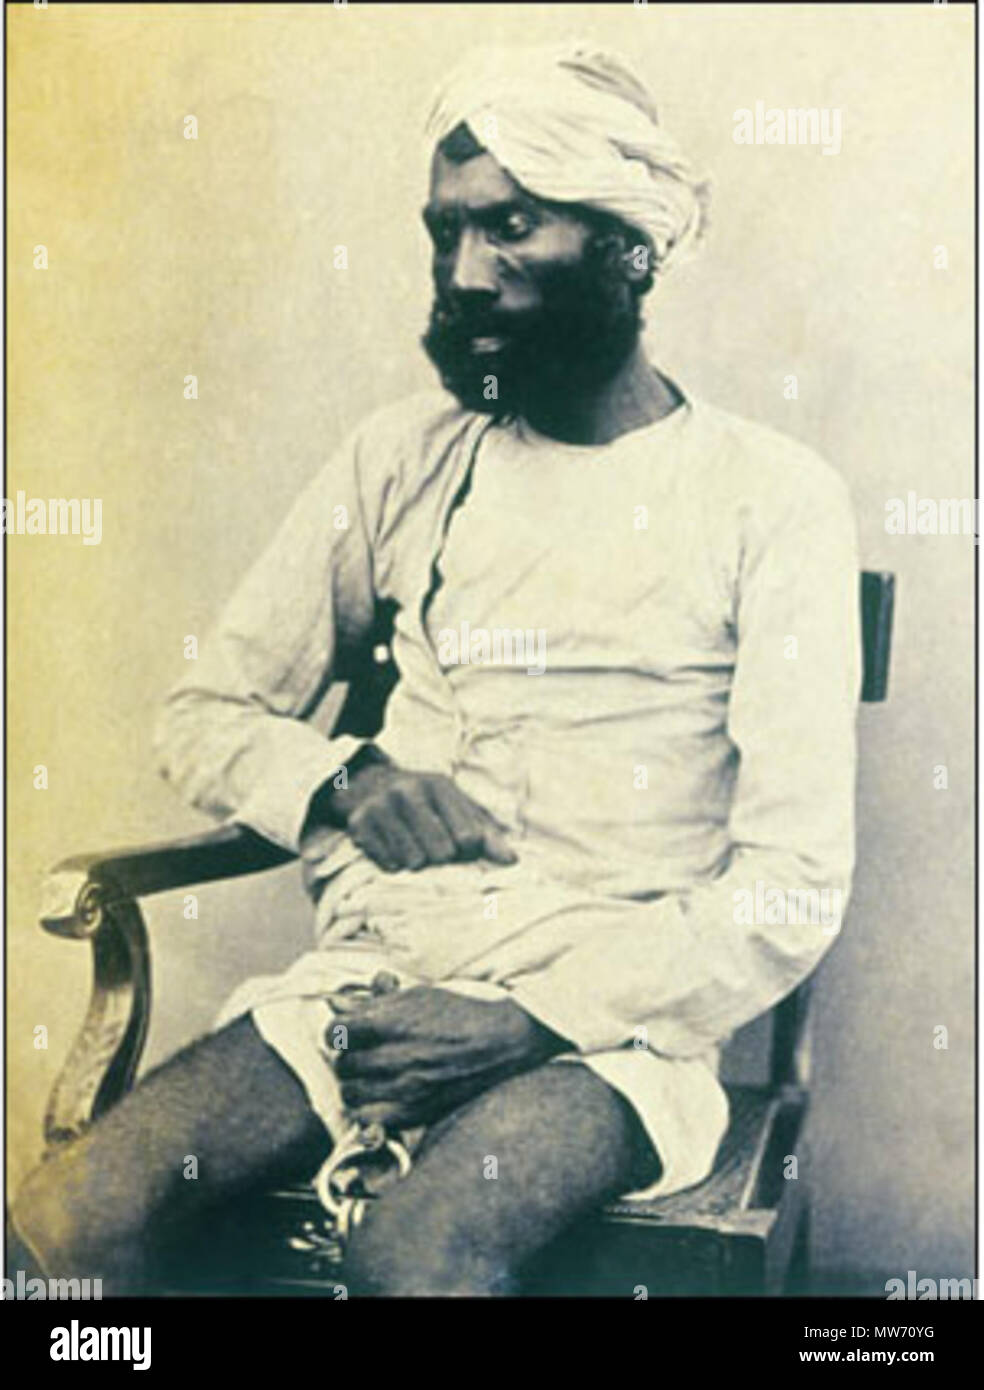 20 A hand-written caption identifies the man as Gungoo Mehter who was tried at Kanpur for killing many of the Sati Chaura survivors, including many women and children. He was convicted and hanged at Kanpur on 8 September 1859. Stock Photo